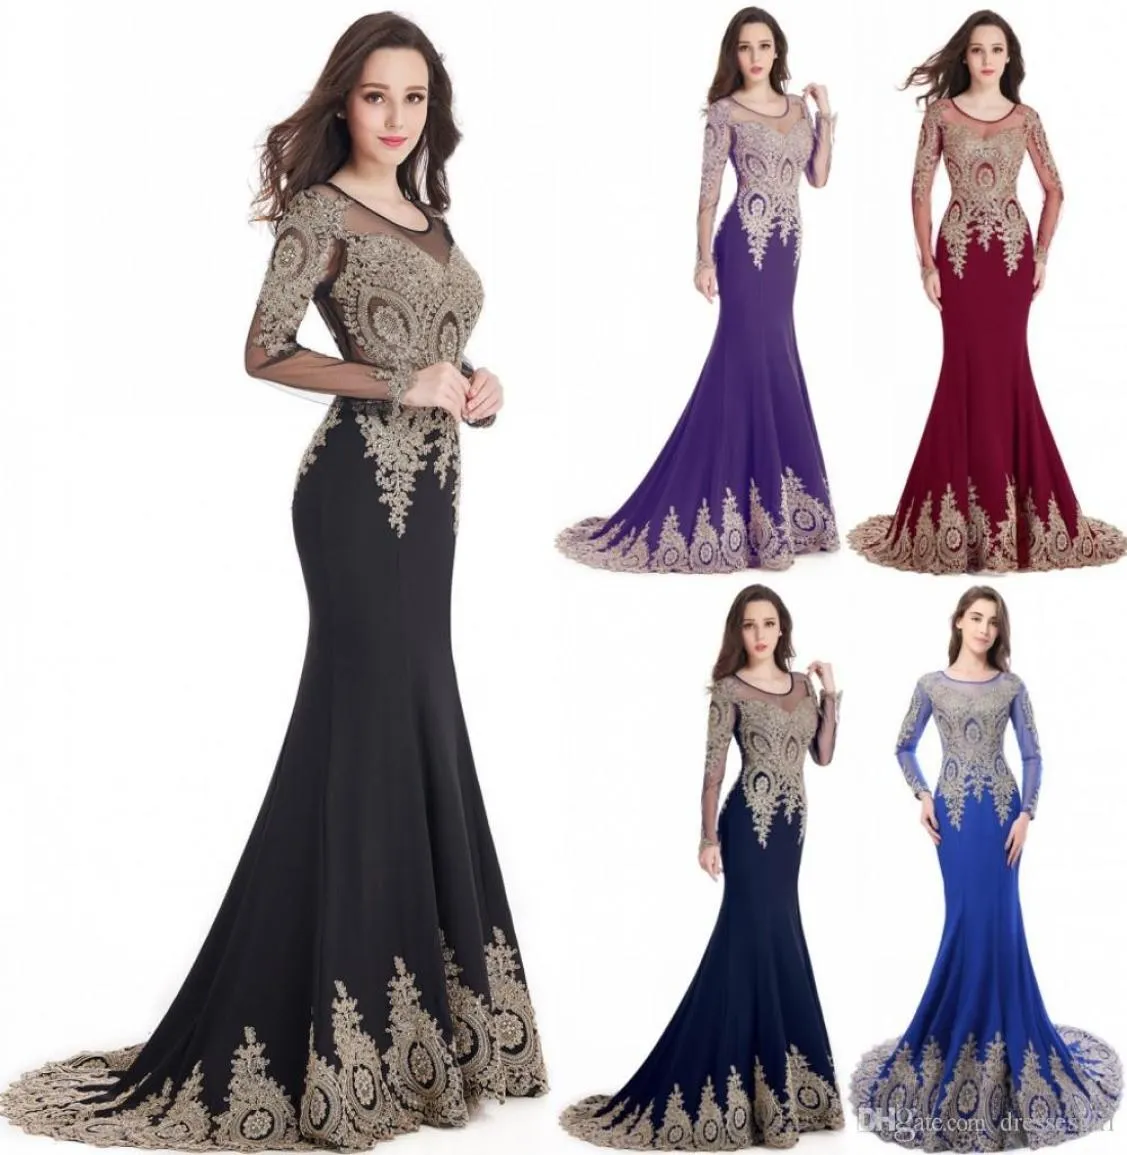 Babyonlinedress Luxury Beads Gold Lace Mermaid Evening Dresses Long Sexy Illusion Back Long Sleeve Prom Party Gowns Charming Eveni2945416